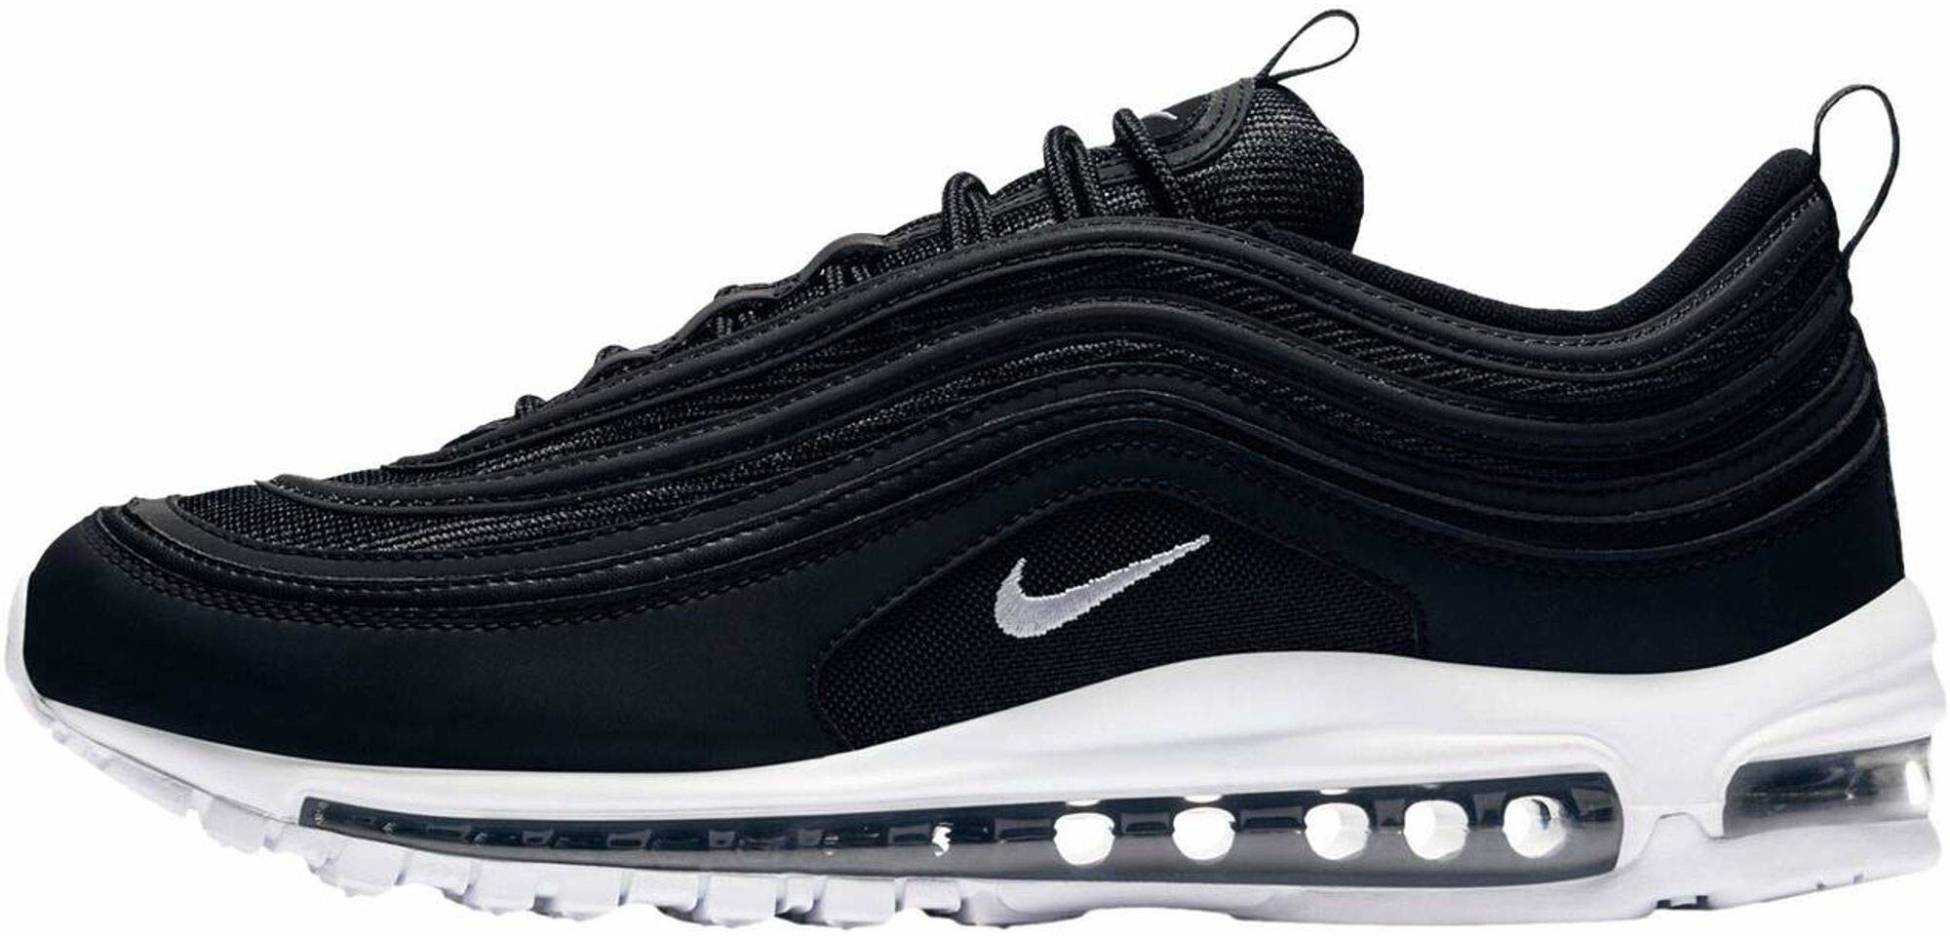 peace dash Exchange Nike Air Max 97 sneakers in 90+ colors (only $130) | RunRepeat